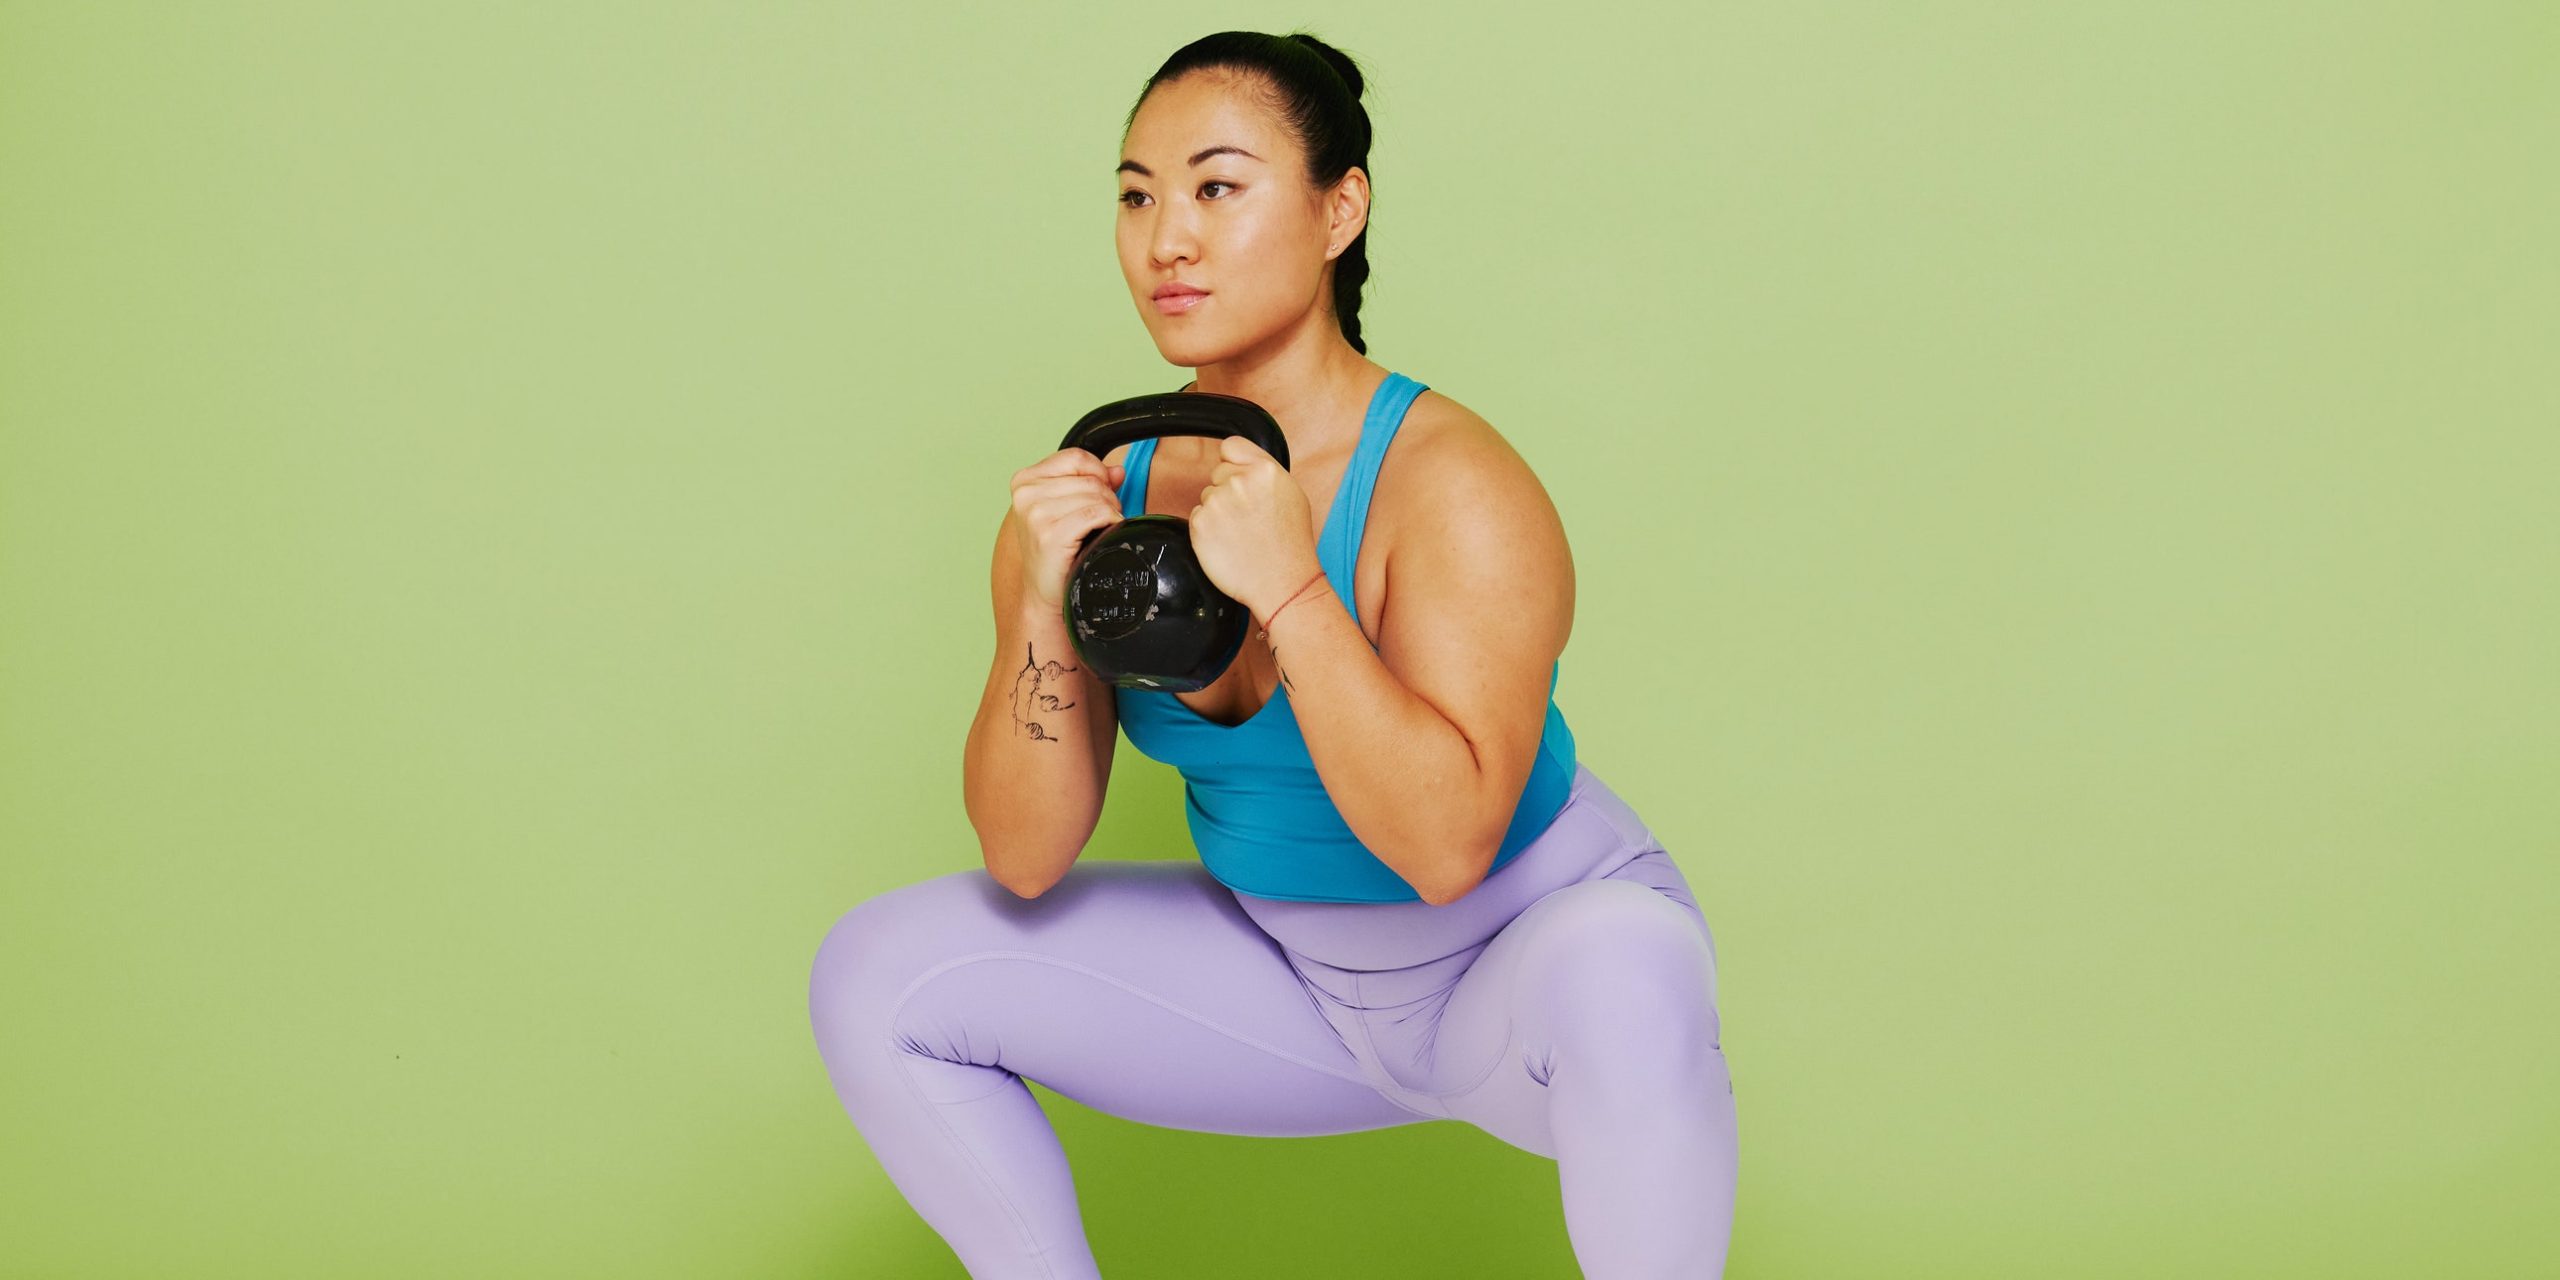 15-kettlebell-moves-that-will-work-every-muscle-in-your-body